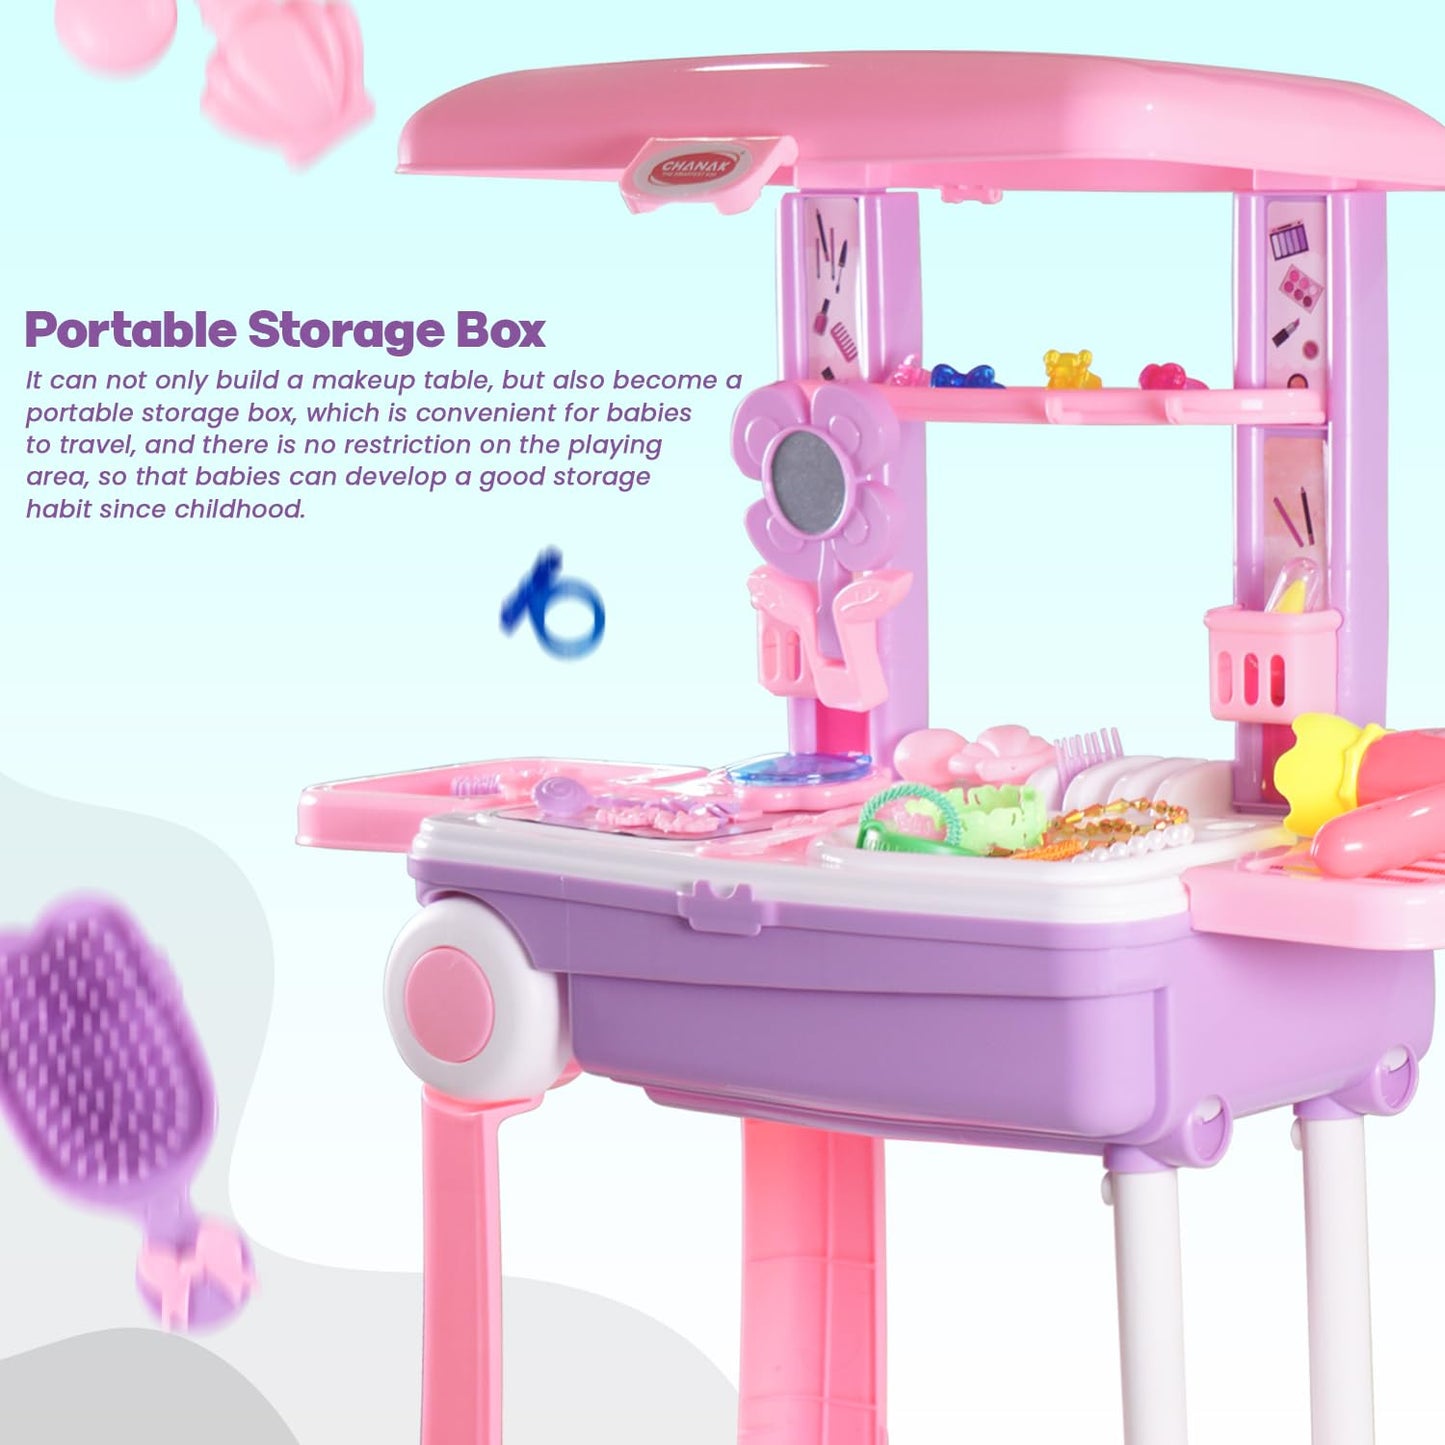 Pretend Play Fashion 3 in 1 Beauty Makeup Kit with Dressing Table Set Toys for Kids Girls